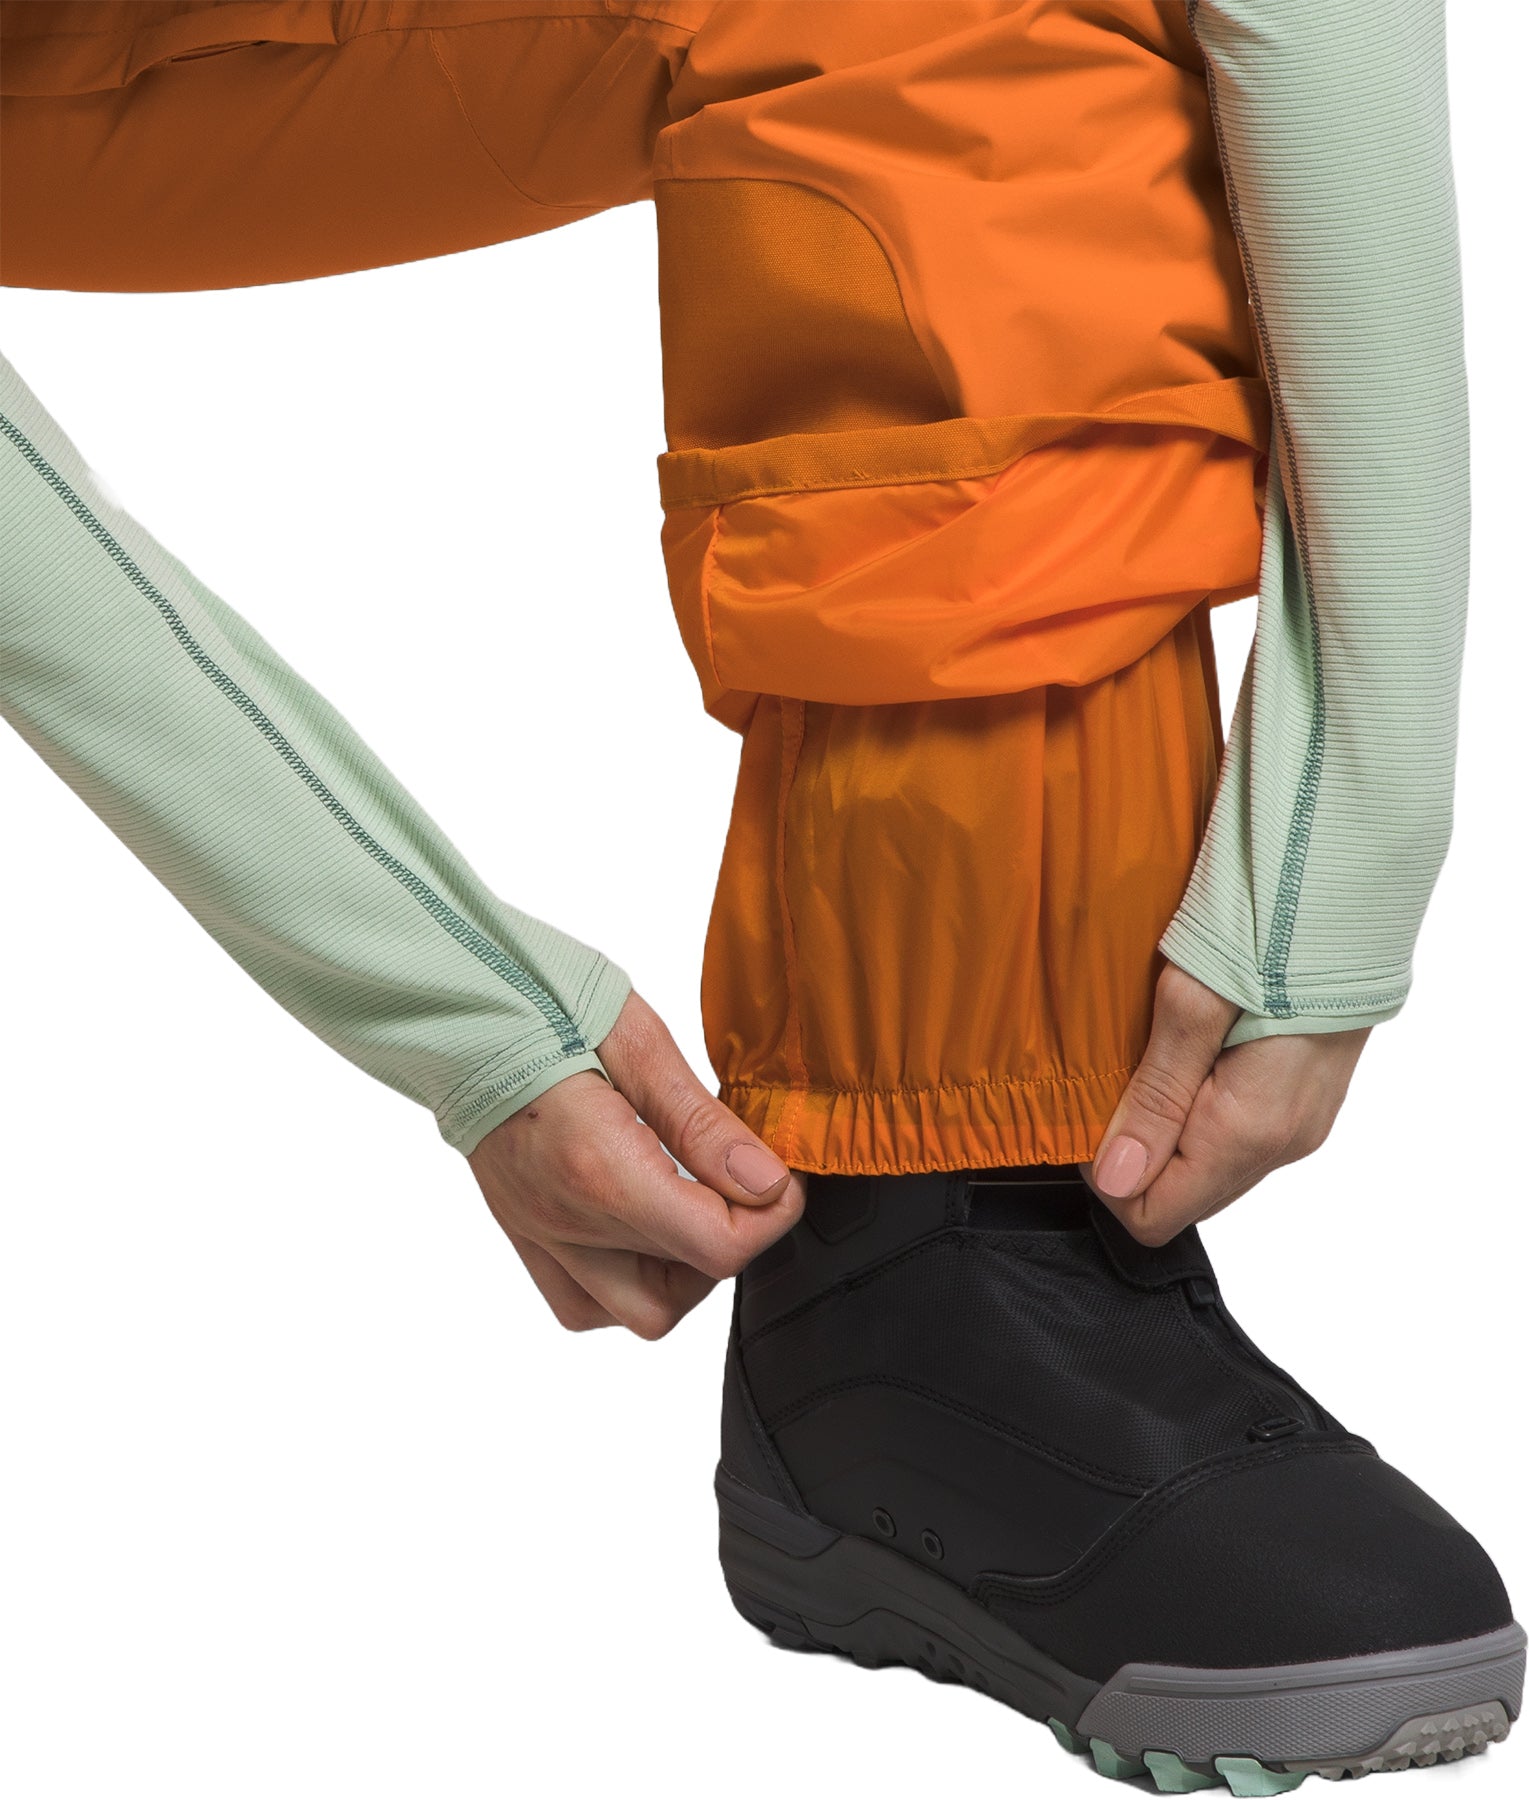 The North Face Inclination Pants - Women's